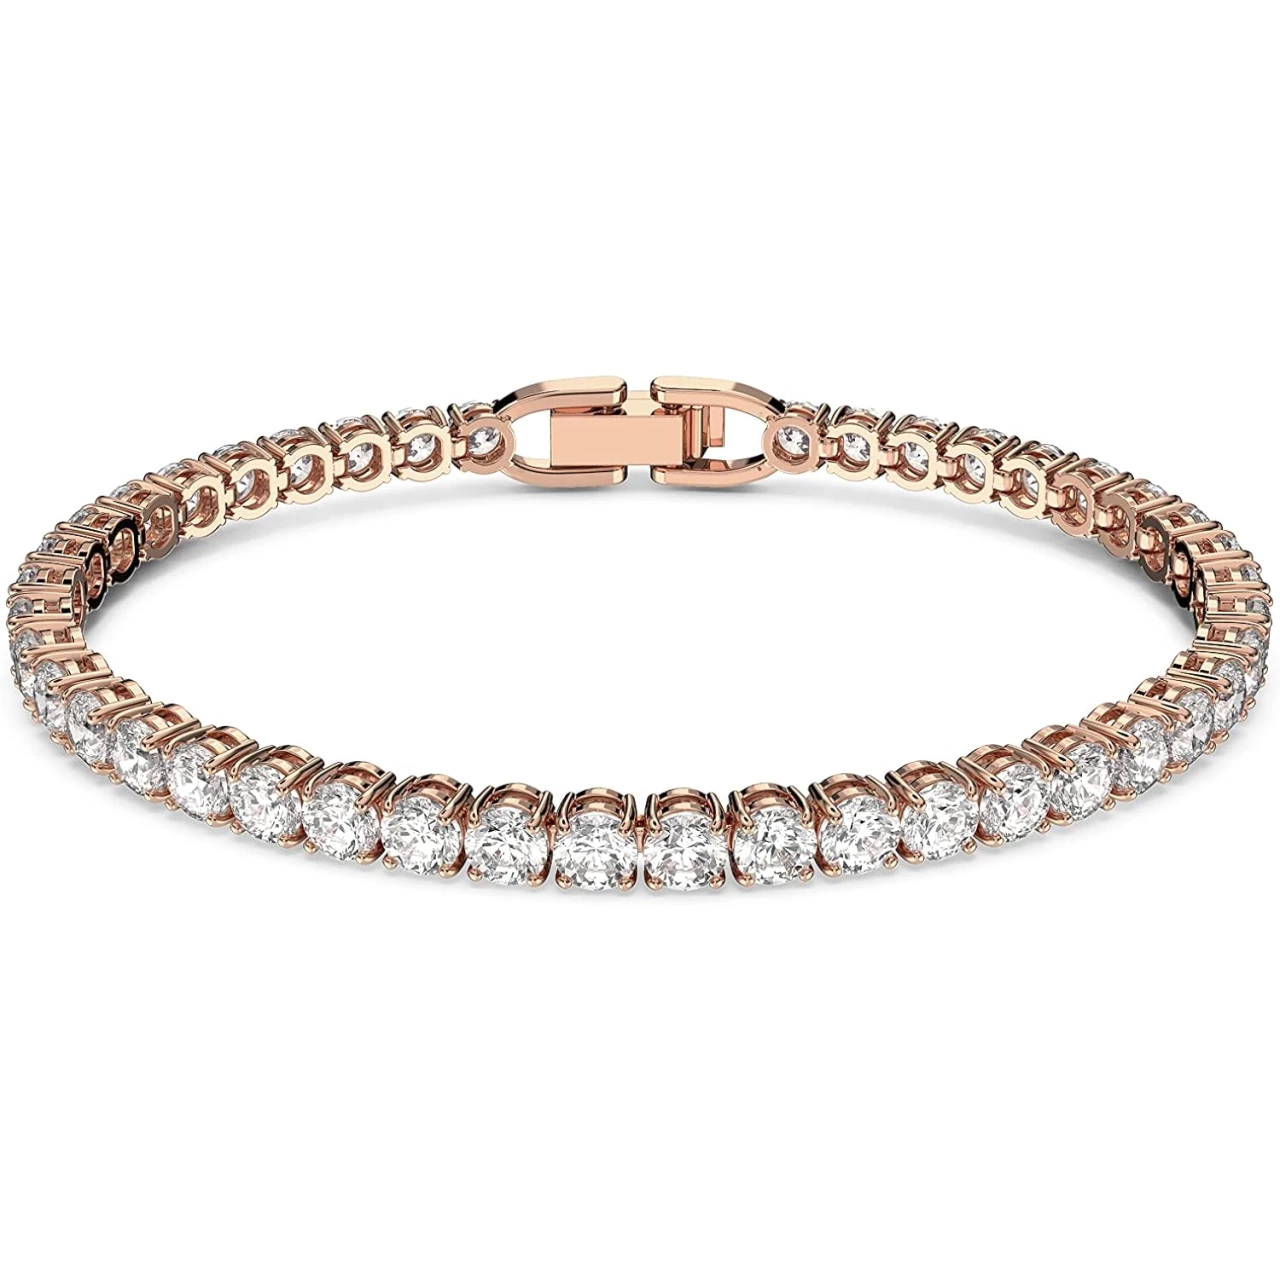 SWAROVSKI Tennis Deluxe Crystal Bracelet and Necklace Jewelry Collection